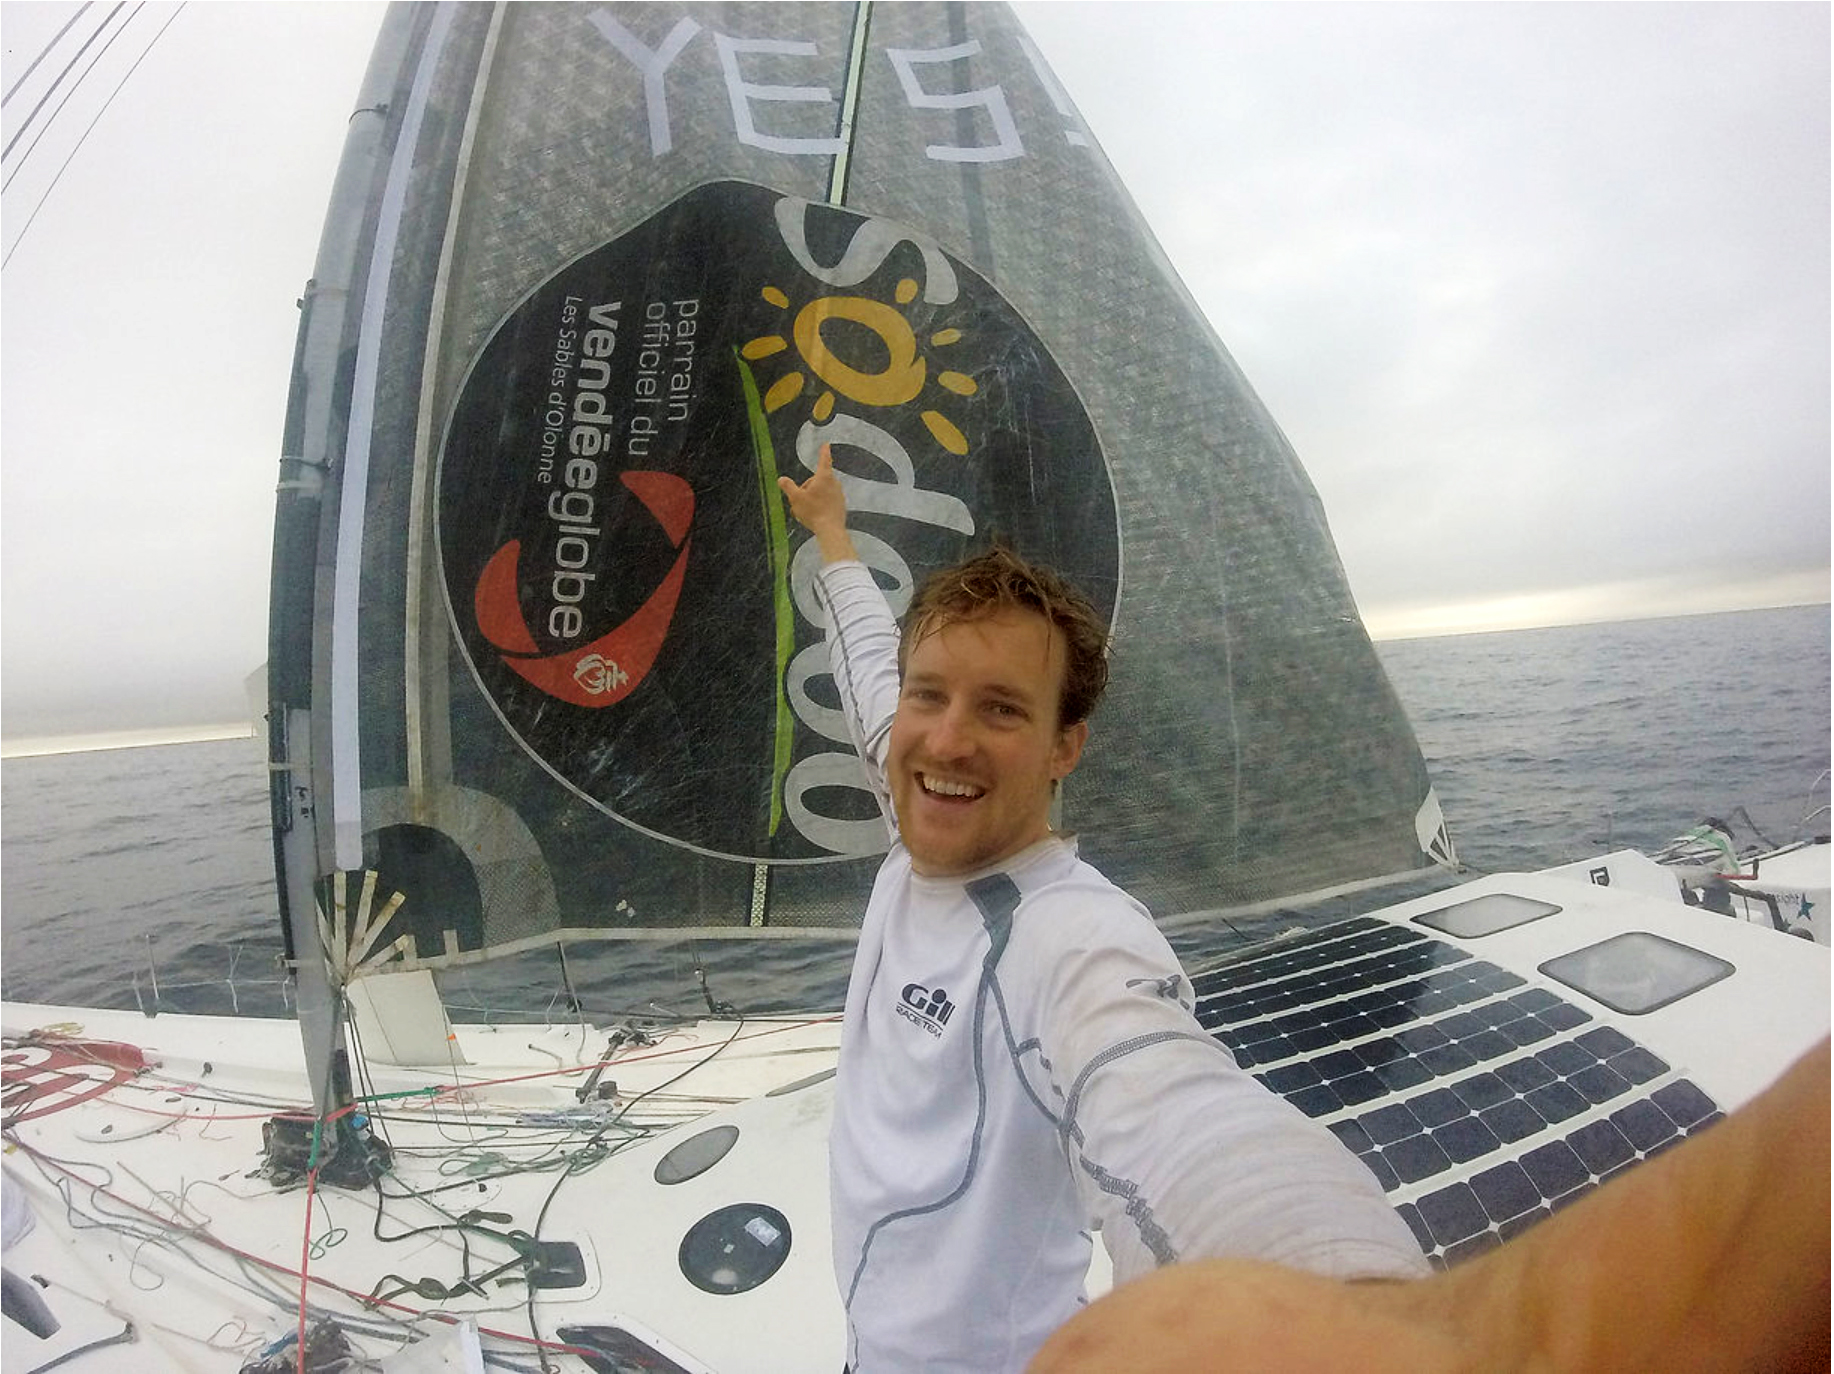 Conrad Colmam's jury rig is up and moving his boat toward the finish of the Vendee Globe.